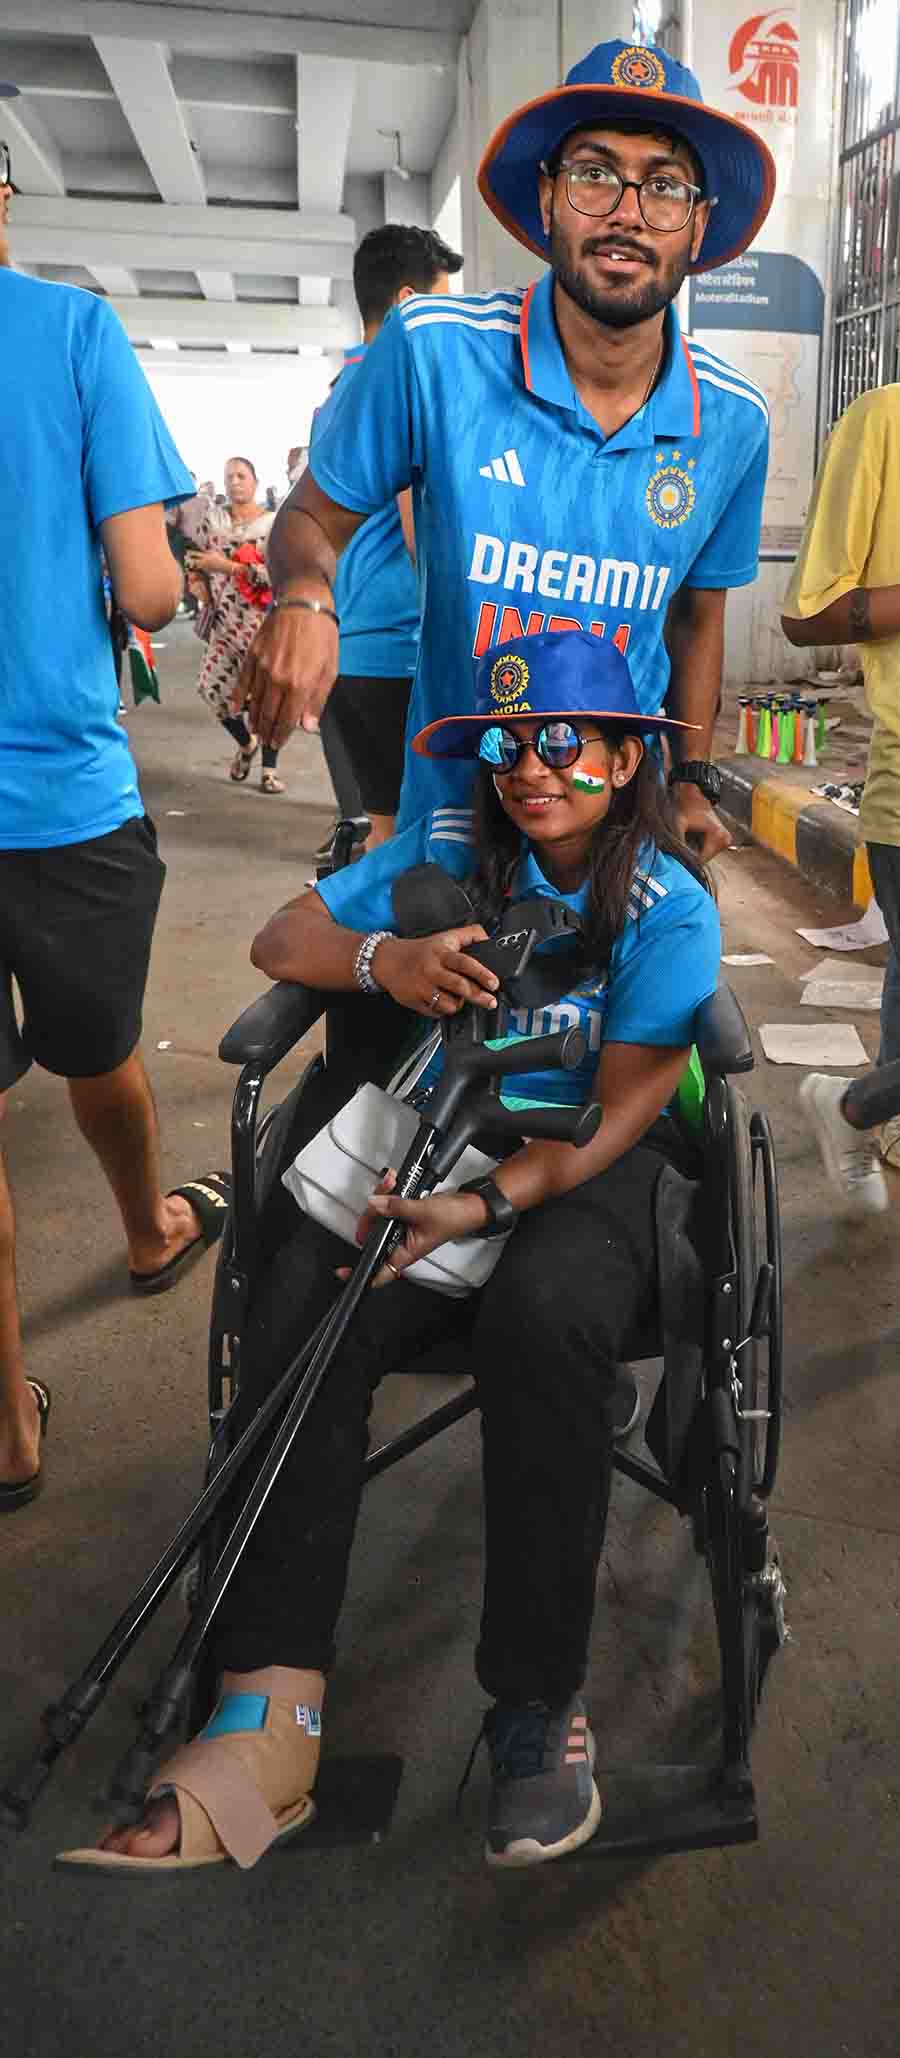 A fan turns up in a wheelchair with her spirit unwounded